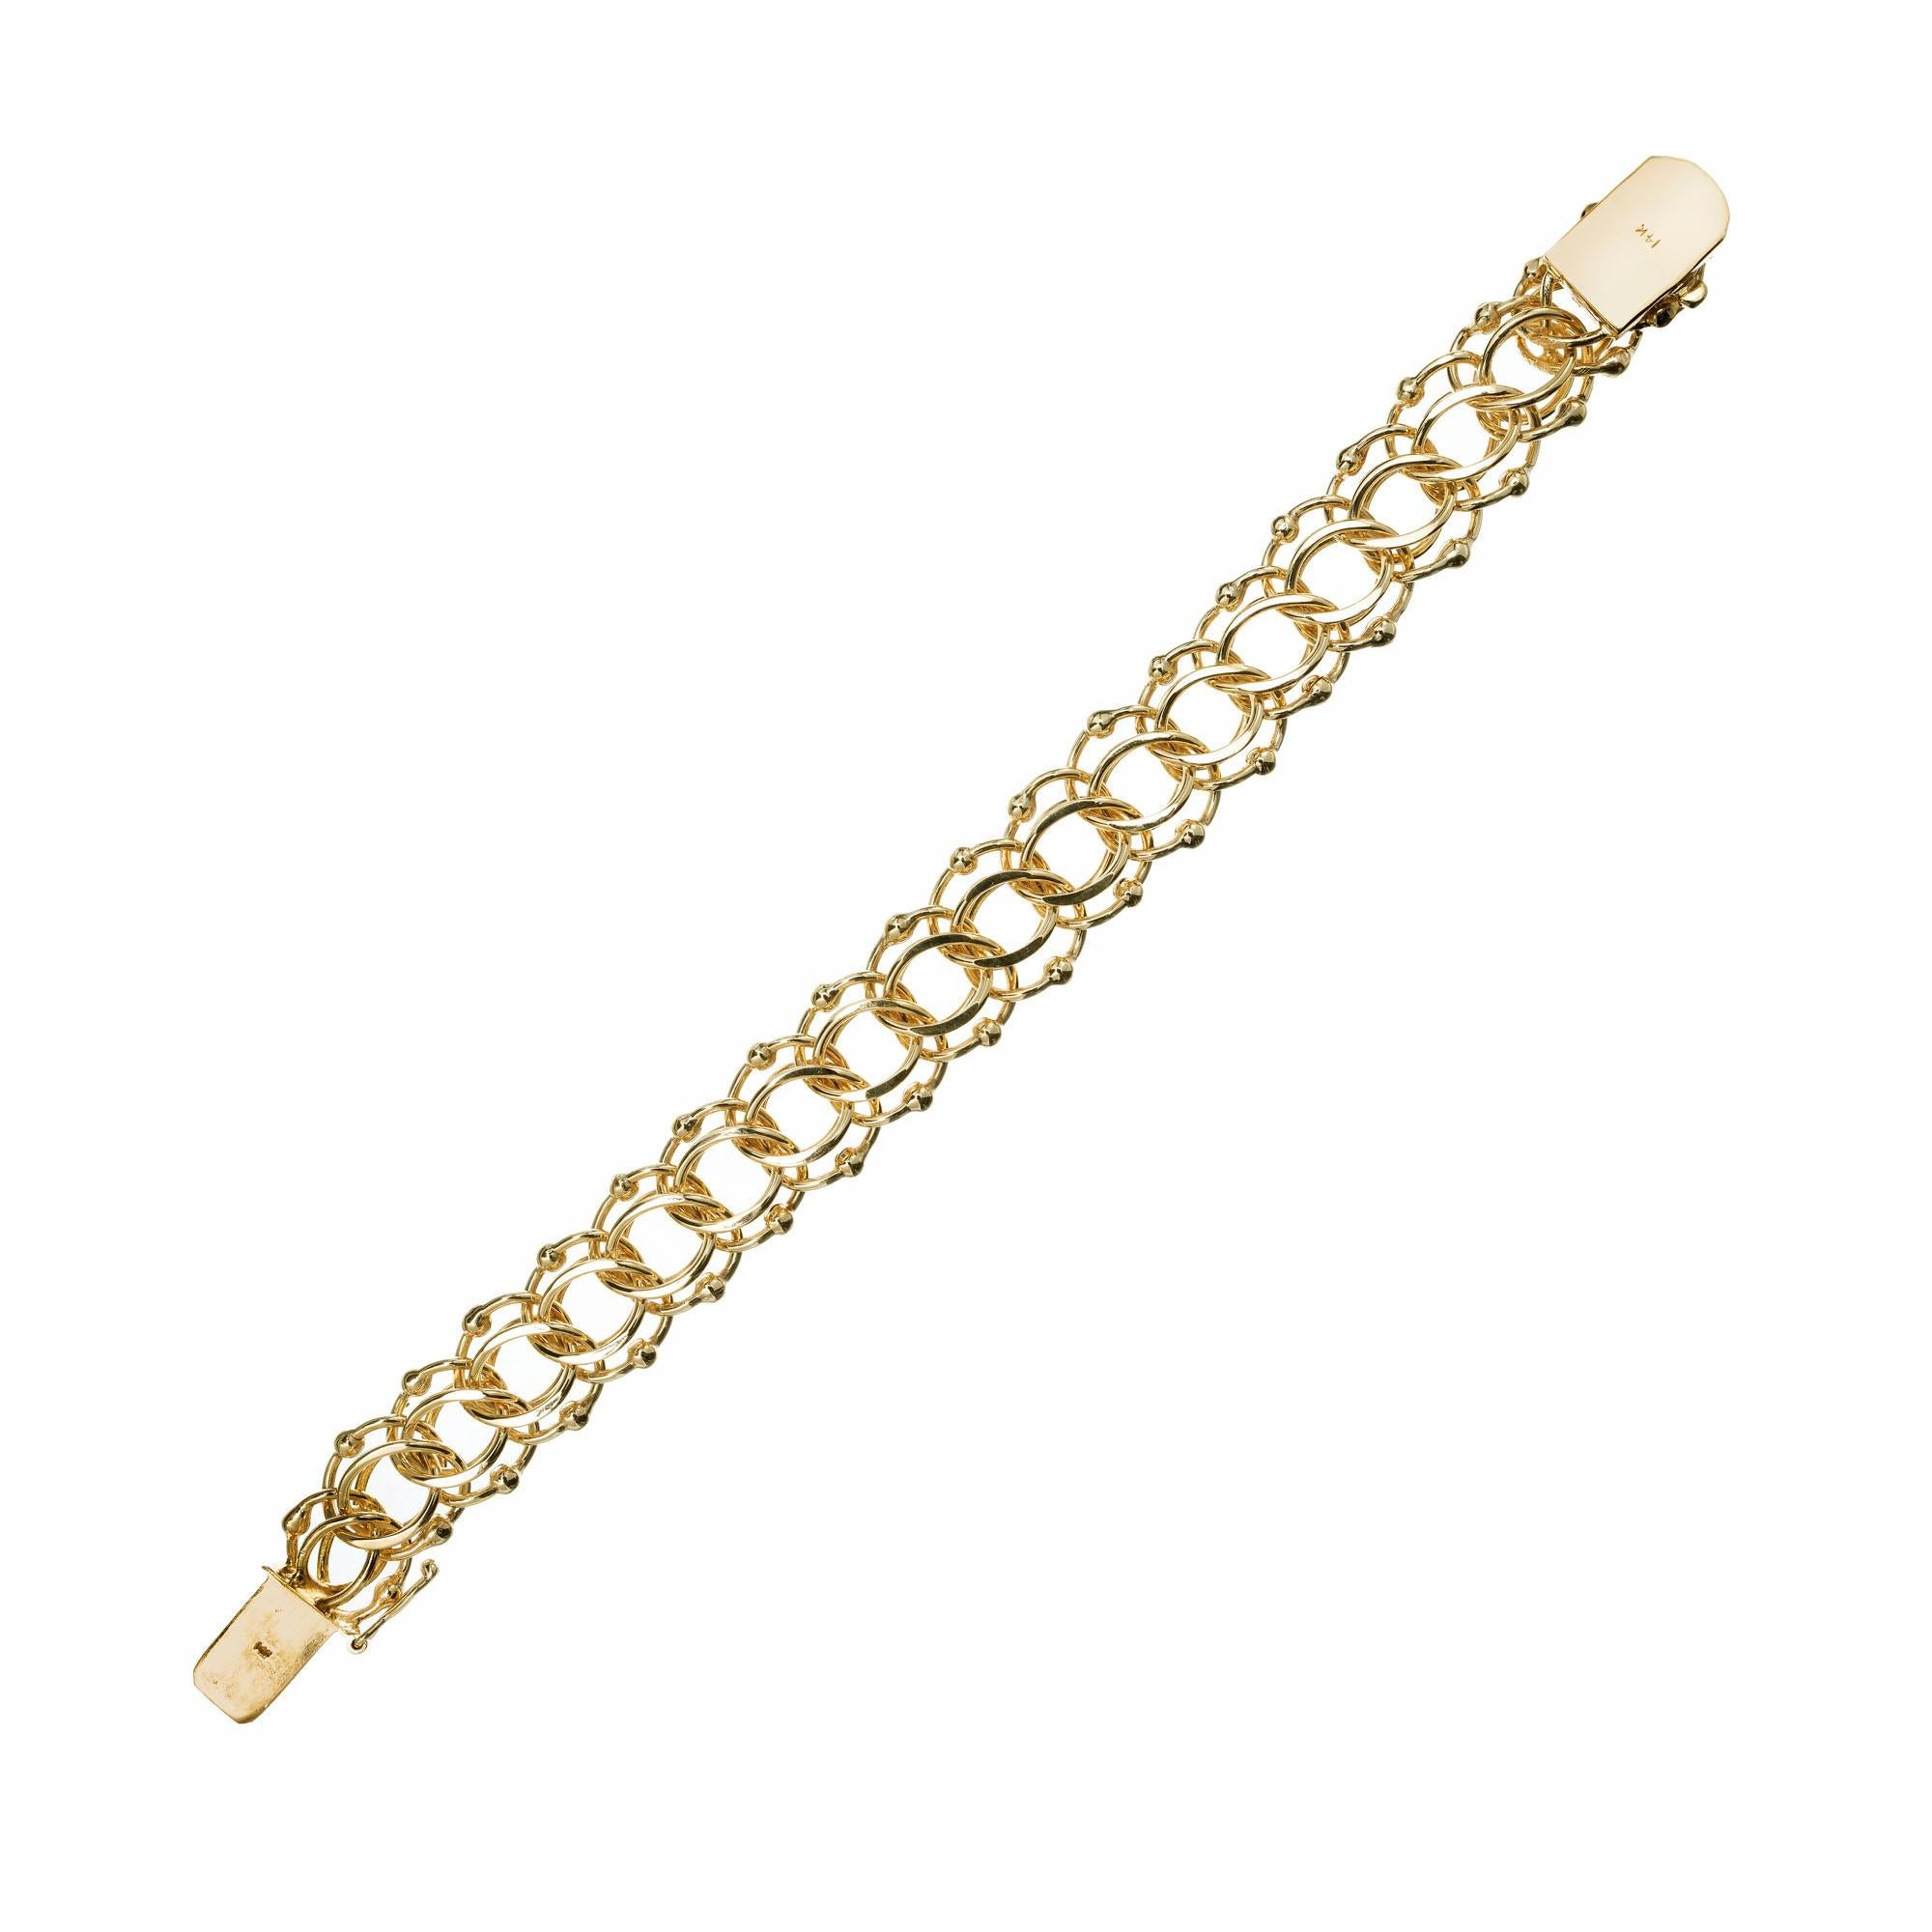 Vintage 1950's heavy double spiral link 14k yellow gold bracelet, beaded spiral design. Designed for multiple charms of varying sizes. 7.5 inches in length. 

14k yellow gold
Tested and stamped: 14k
47.6 grams
Length: 7.5 inches
Width: